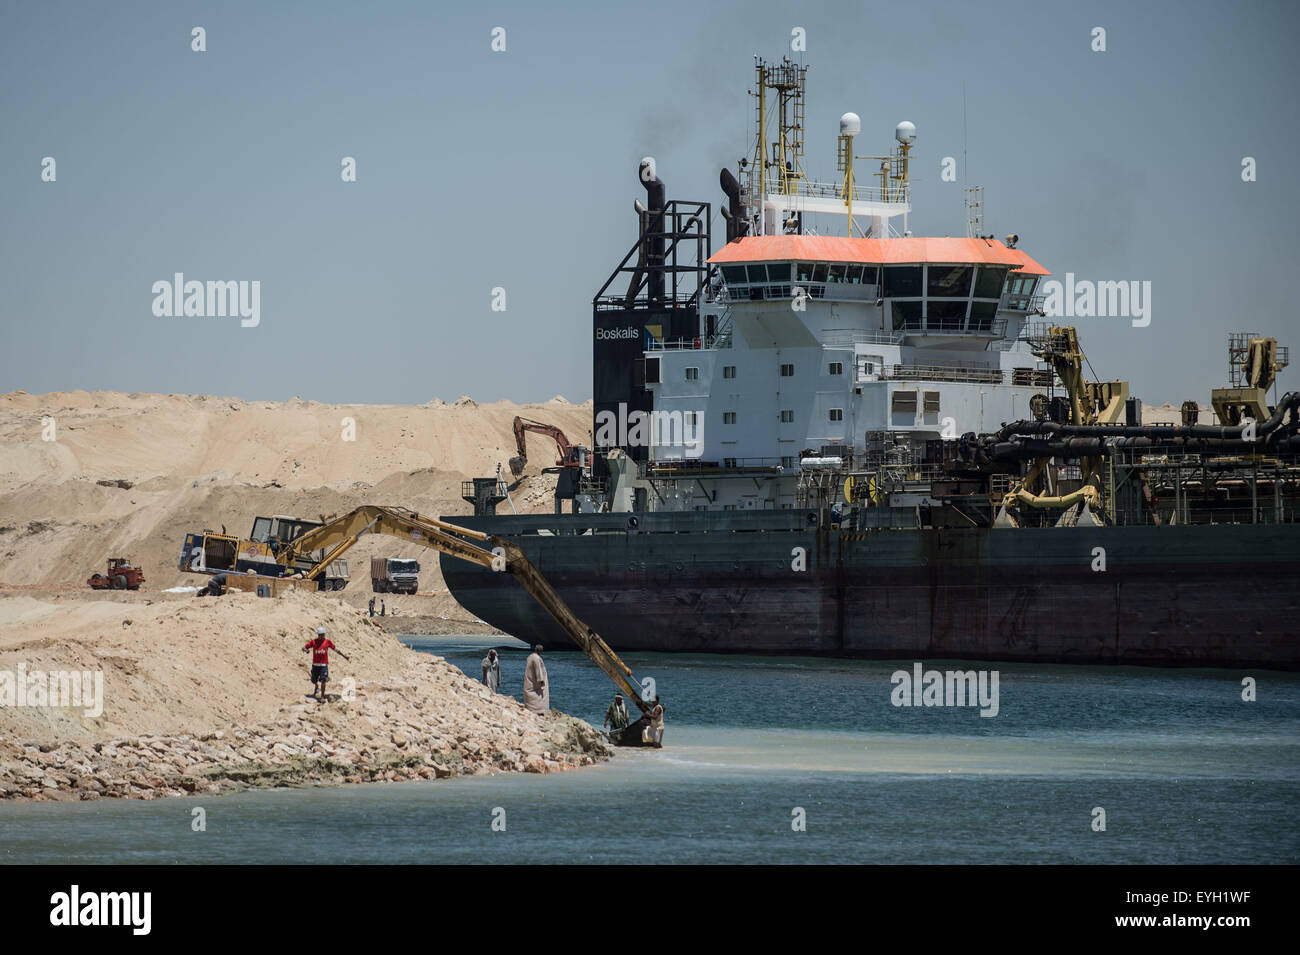 Ismailia, Egypt. 29th July, 2015. Workers are seen on the construction site of the new Suez Canal in Ismailia, a port city in Egypt, on July 29, 2015. The dredging work of Egypt's 'New Suez Canal' has been completed and the waterway is ready as well as safe for huge ship navigation, Mohab Memish, head of the Suez Canal Authority (SCA), told reporters in a press conference Wednesday. © Pan Chaoyue/Xinhua/Alamy Live News Stock Photo